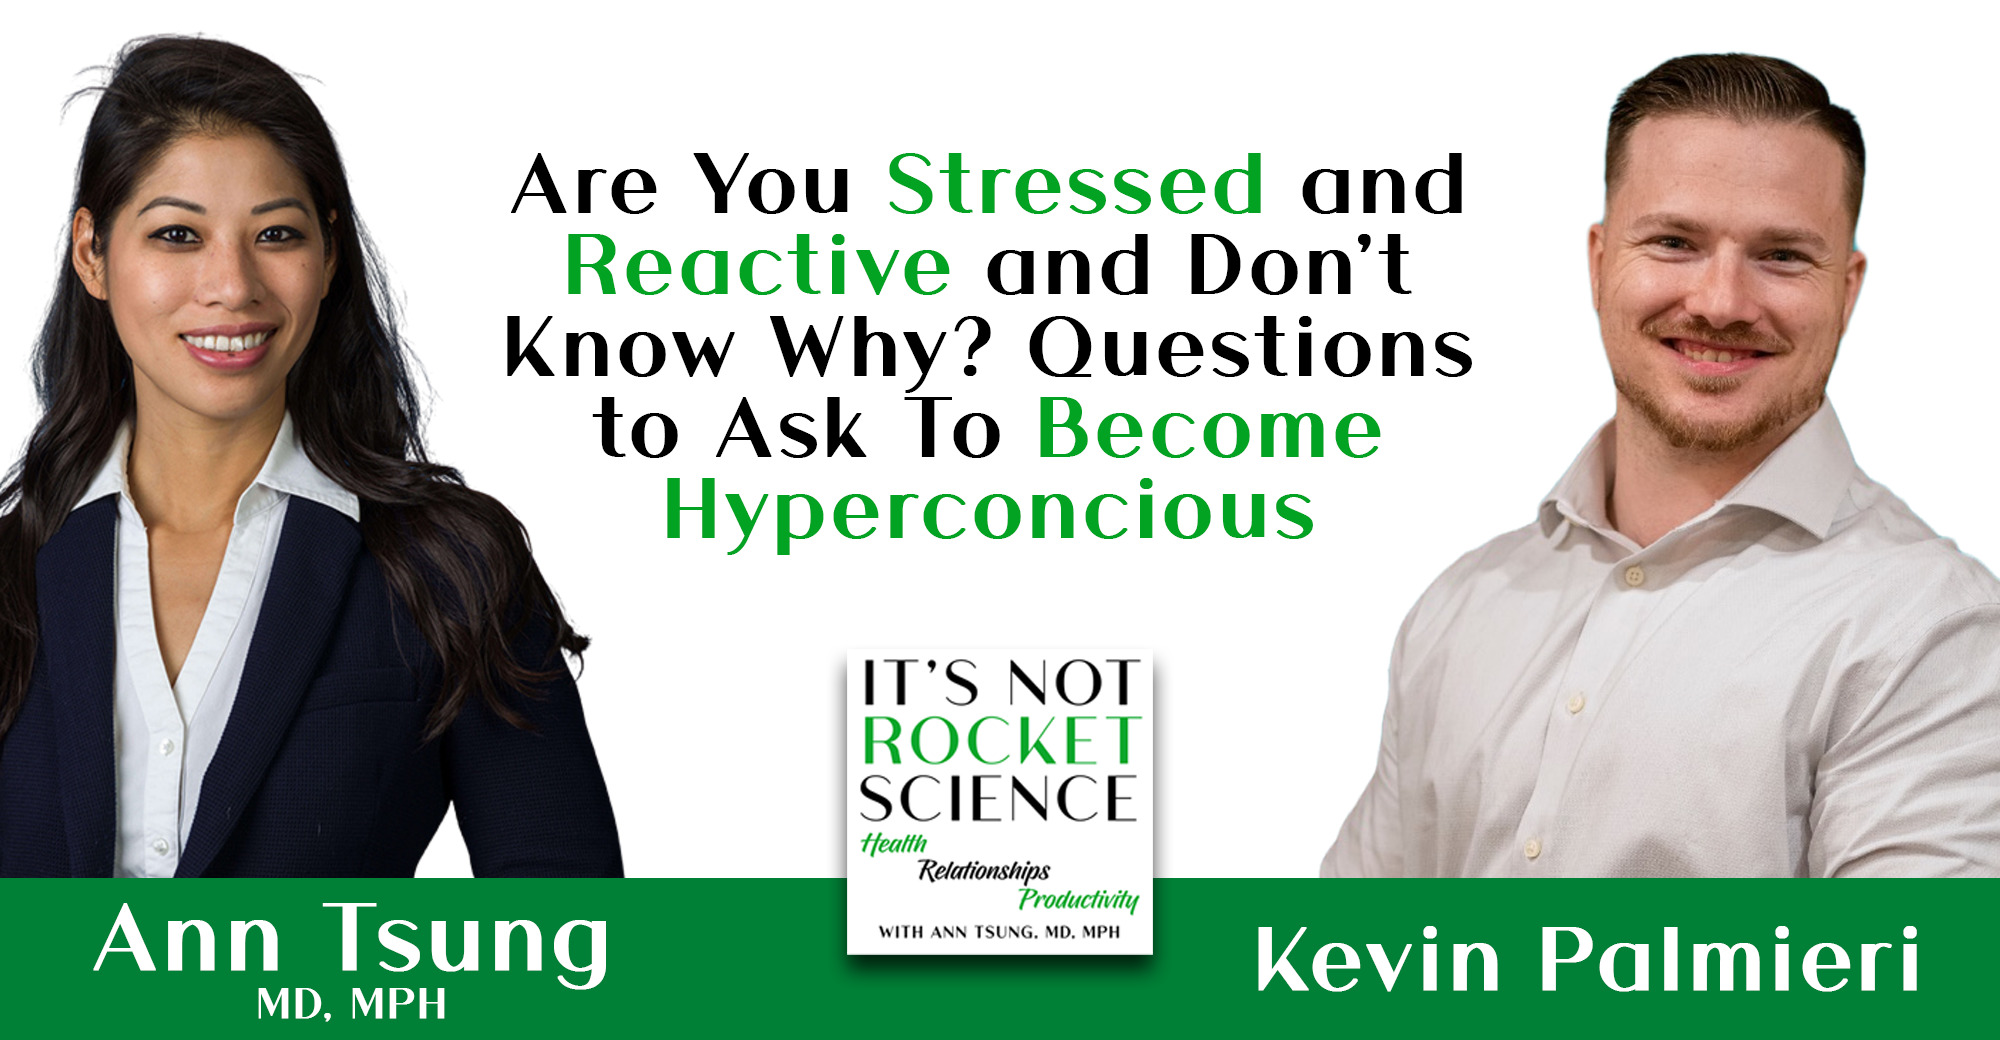 032. Are You Stressed and Reactive and Don’t Know Why? Questions to Ask To Become Hyperconcious with Kevin Palmieri – Founder, CFO, and Host of Next Level University